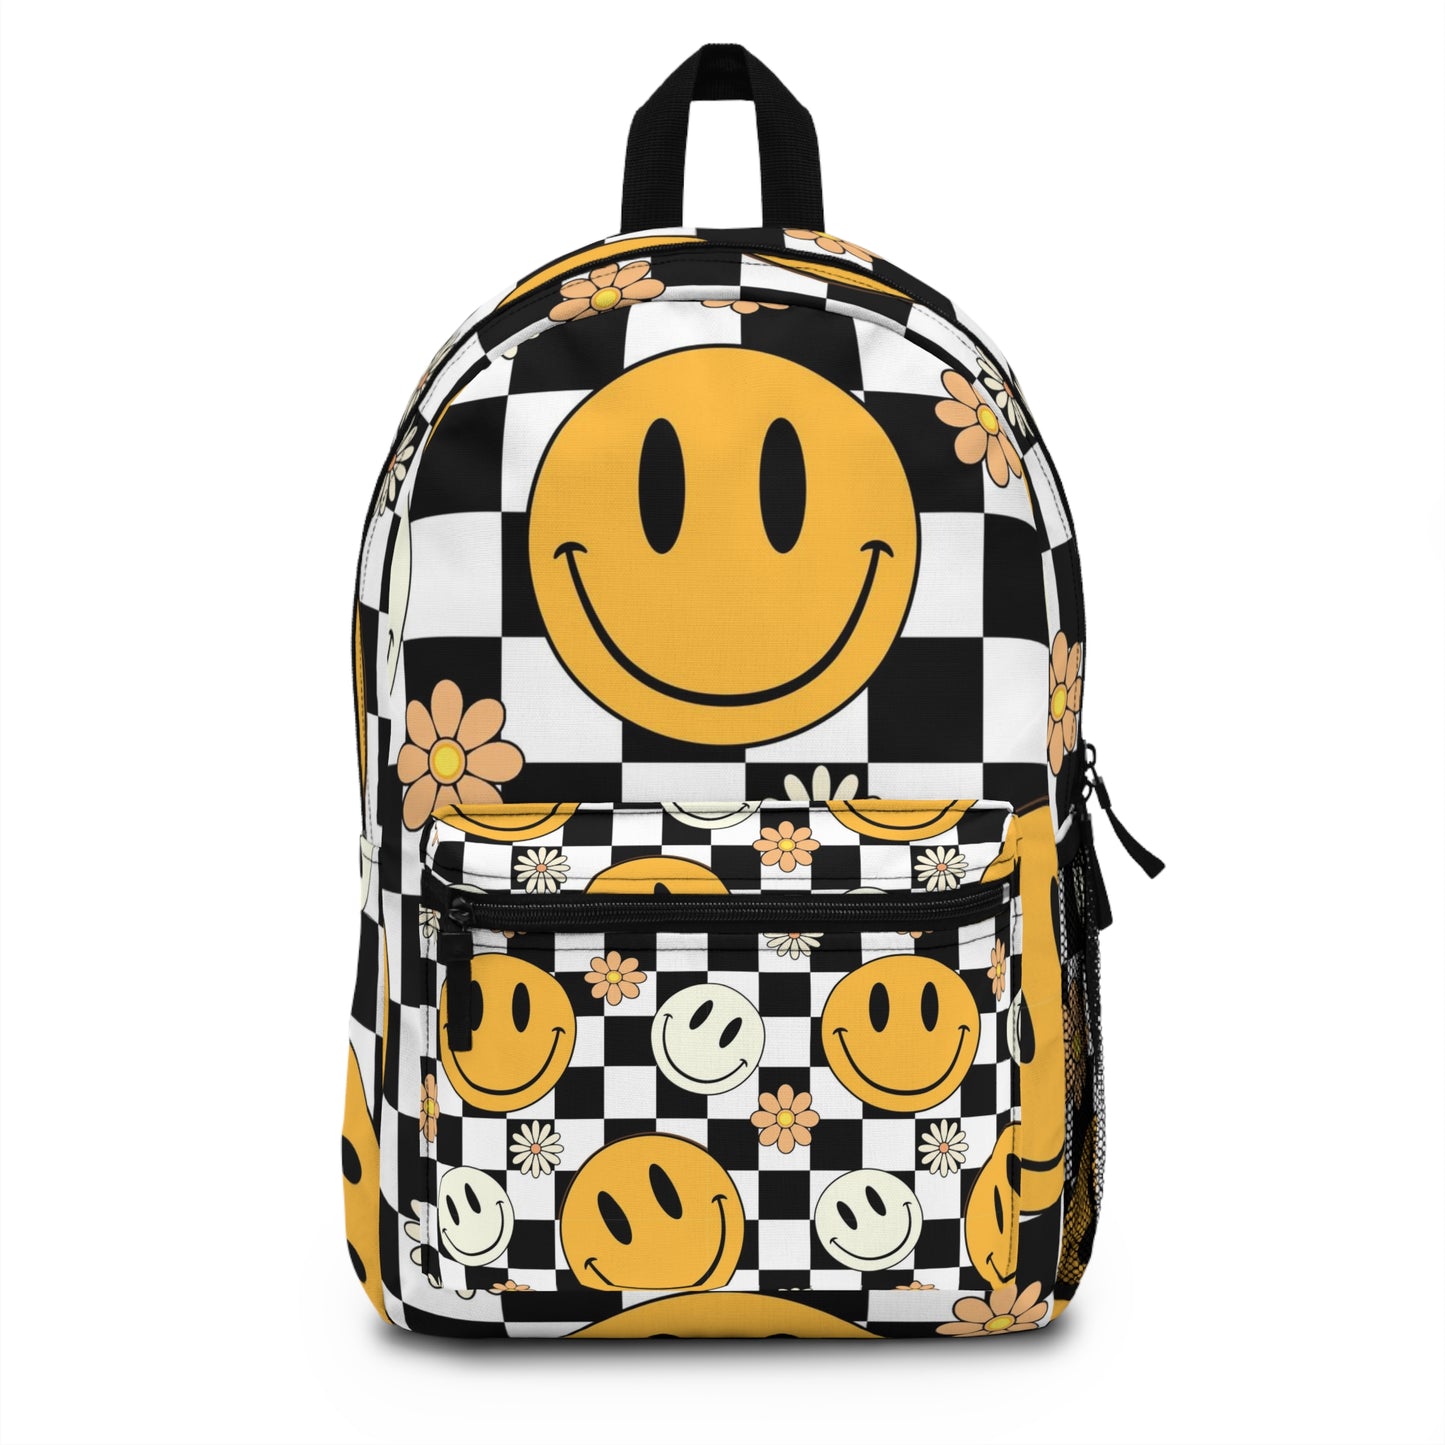 Happy face and Daisy flowers Backpack. Black and white Checkered and yellow and white happy face backpack for him or her. Back to school bag